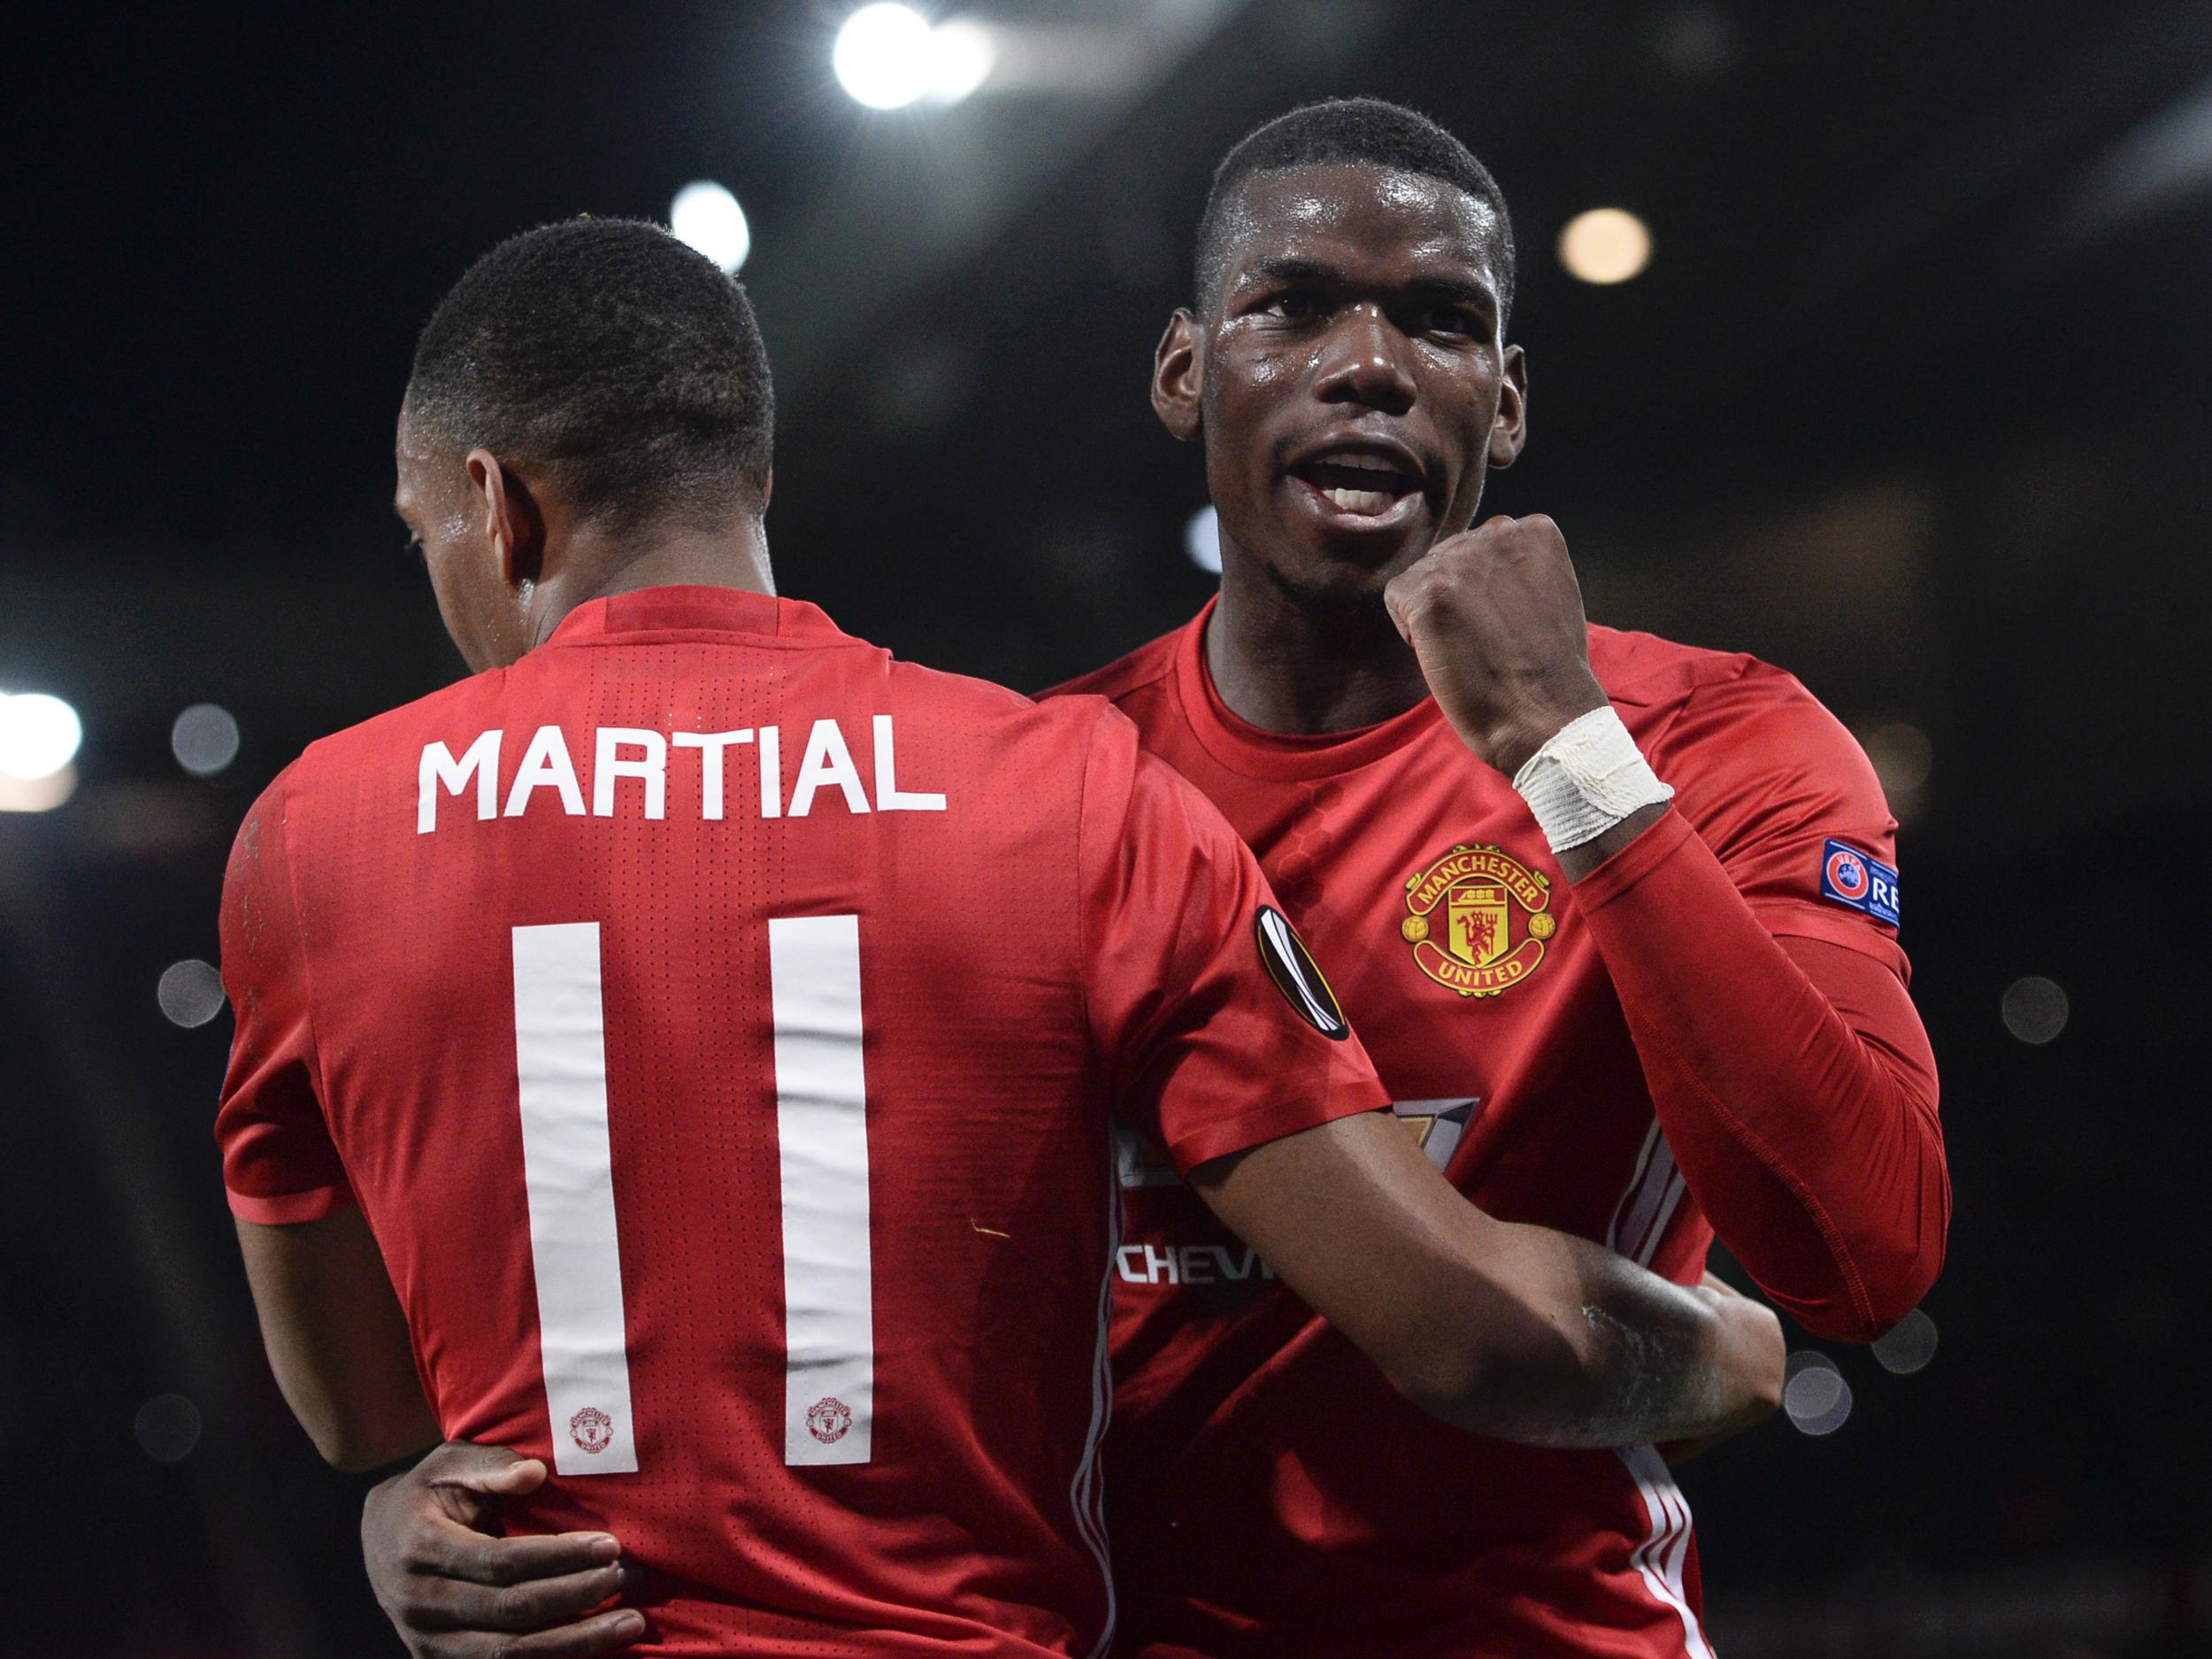 Martial and Pogba scored a penalty each at Old Trafford